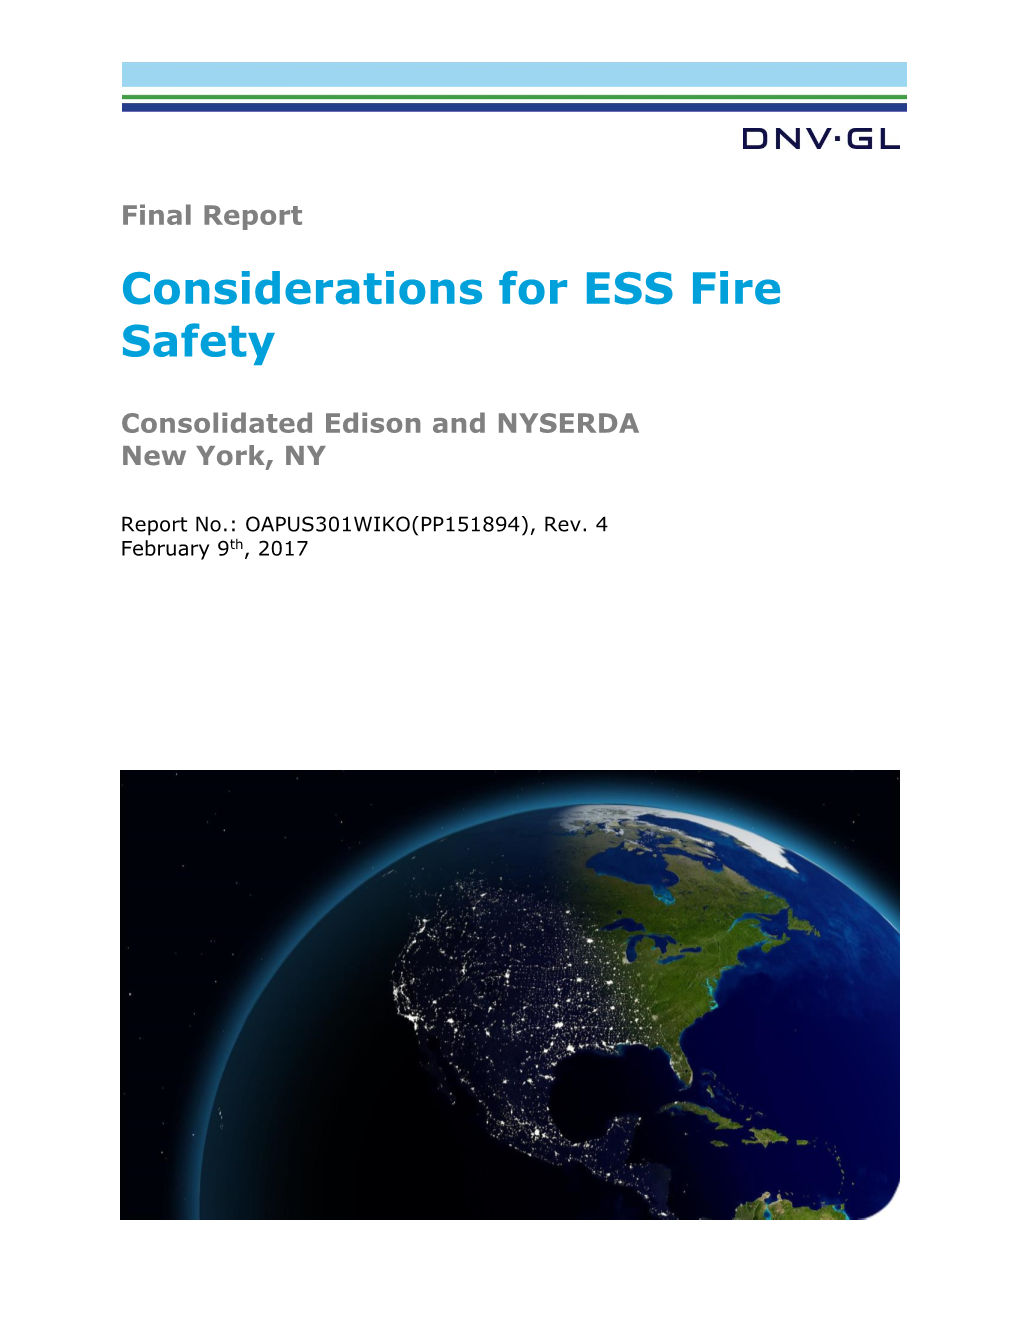 Considerations for ESS Fire Safety